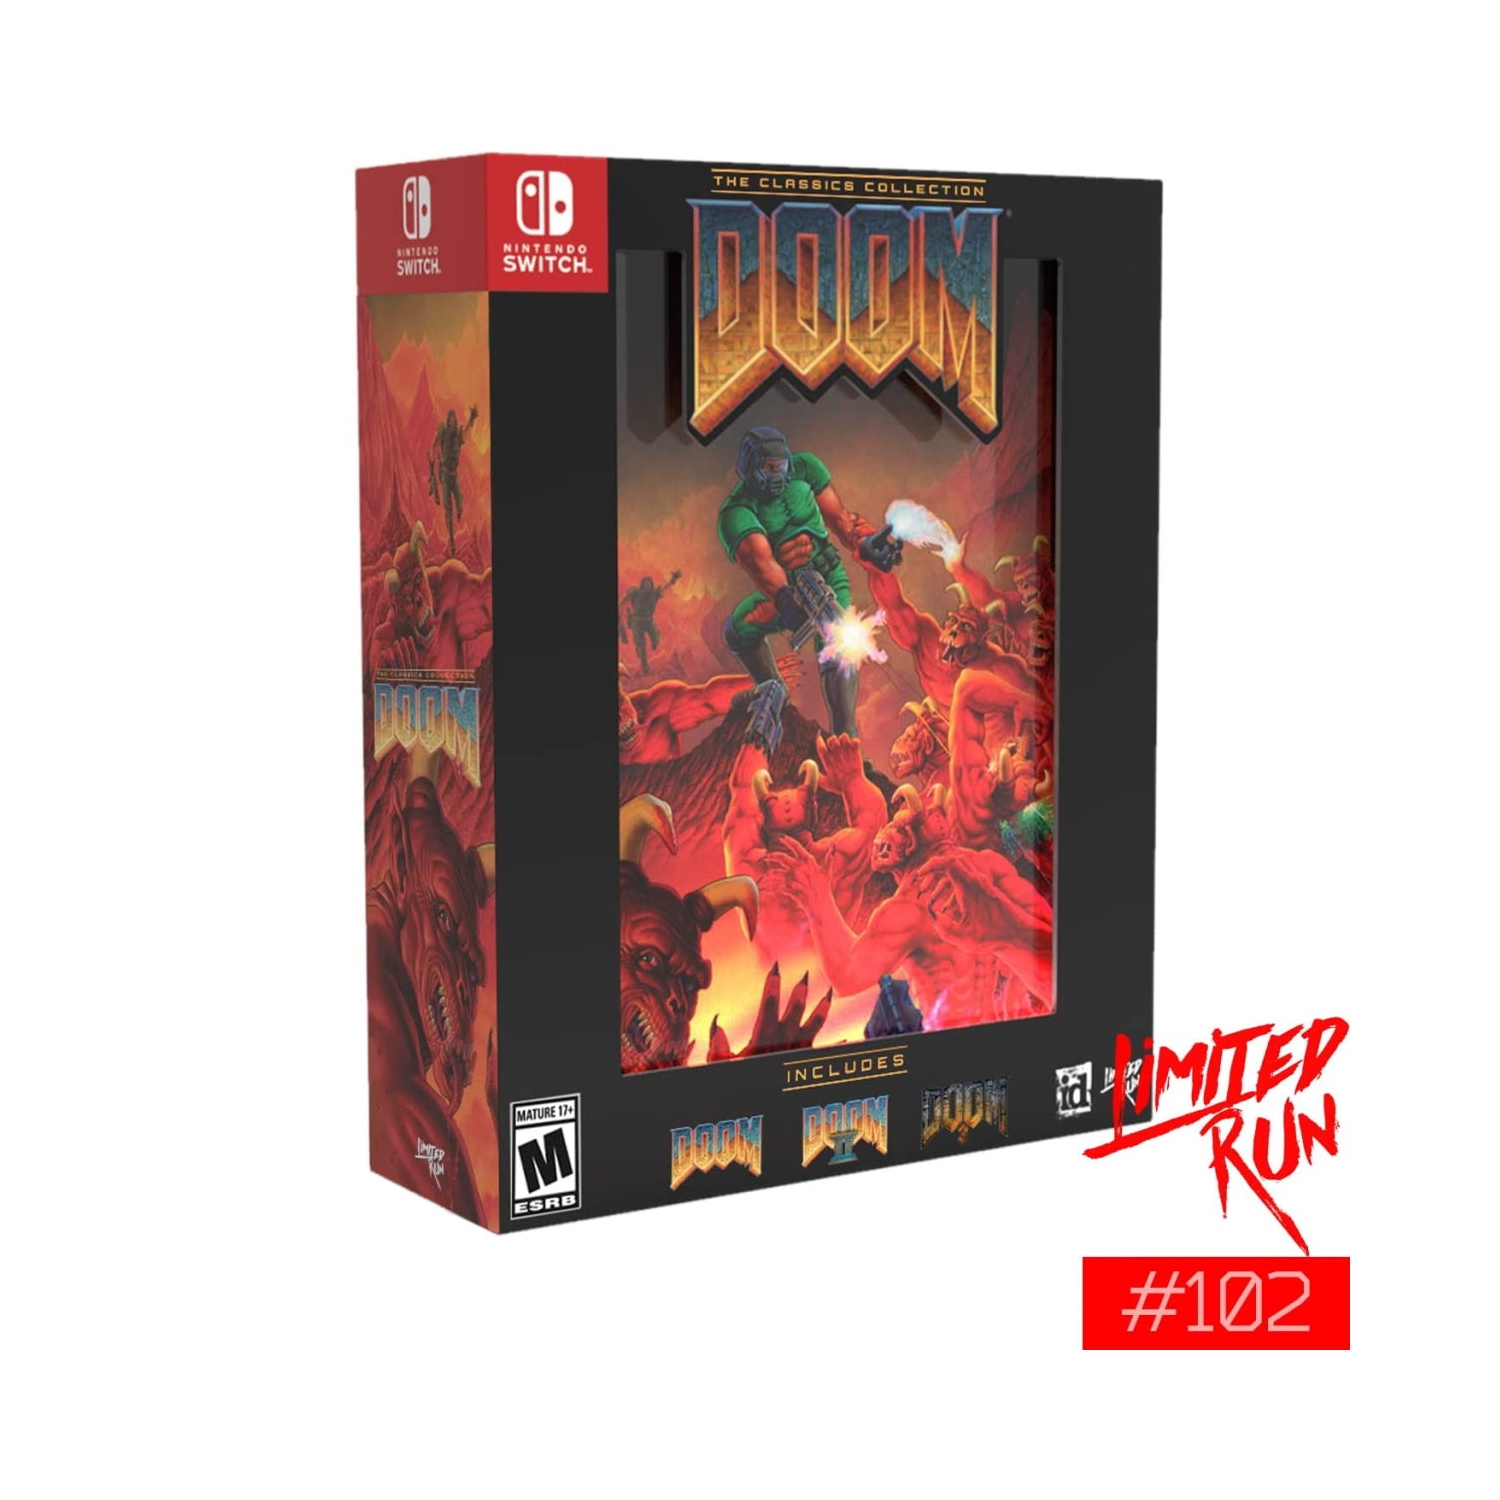 DOOM: The Classics Collection - Collector's Edition - Limited Run #102 [Nintendo Switch]